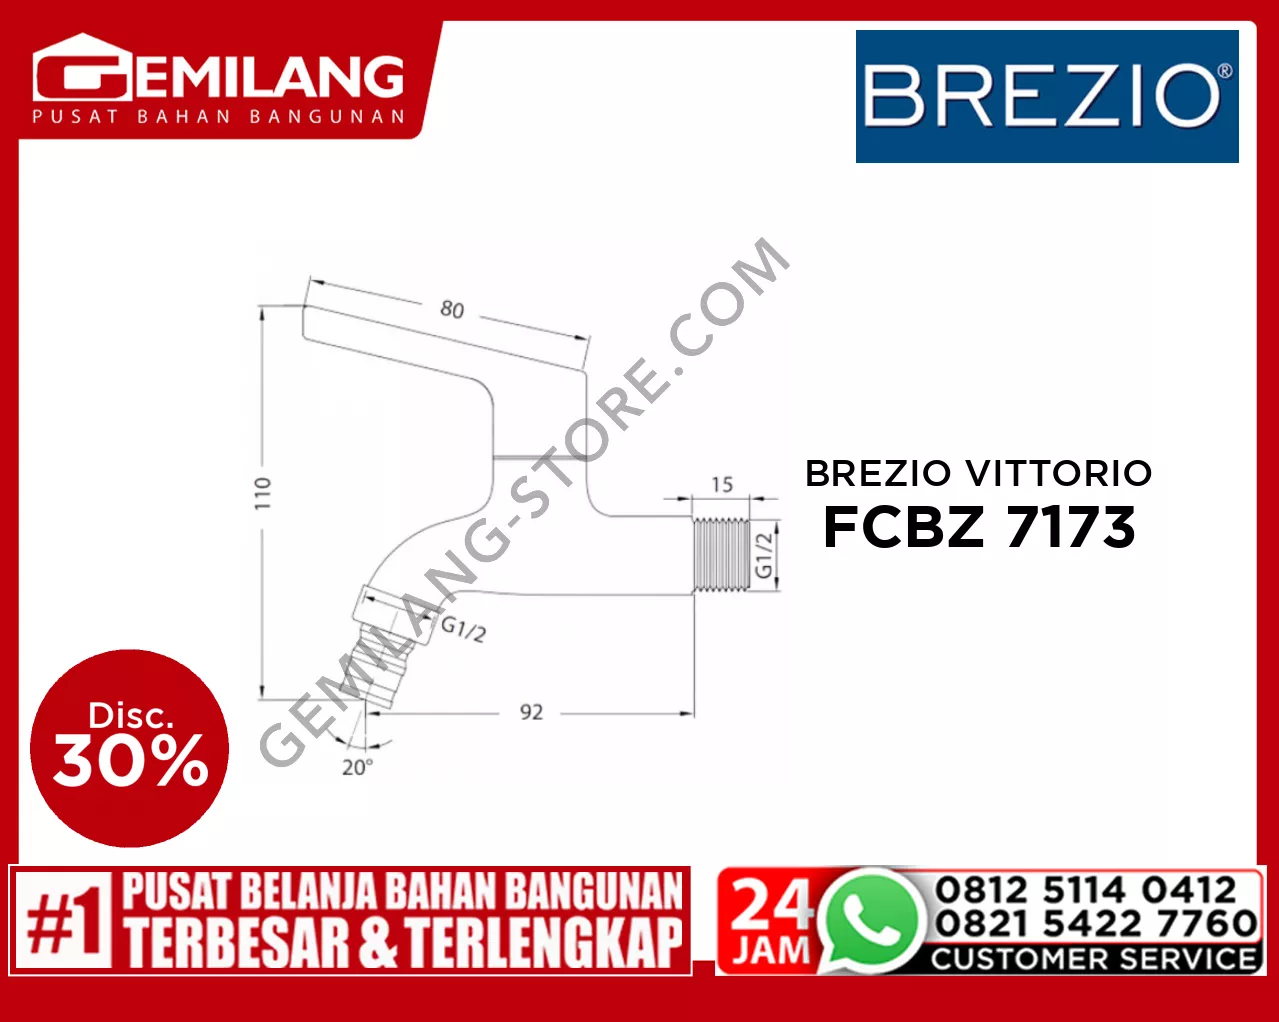 BREZIO VITTORIO SHORT WALL TAP WITH HOSE COUPLING AND SCREW COLLAR CHROME 1/2inch FCBZ 7173